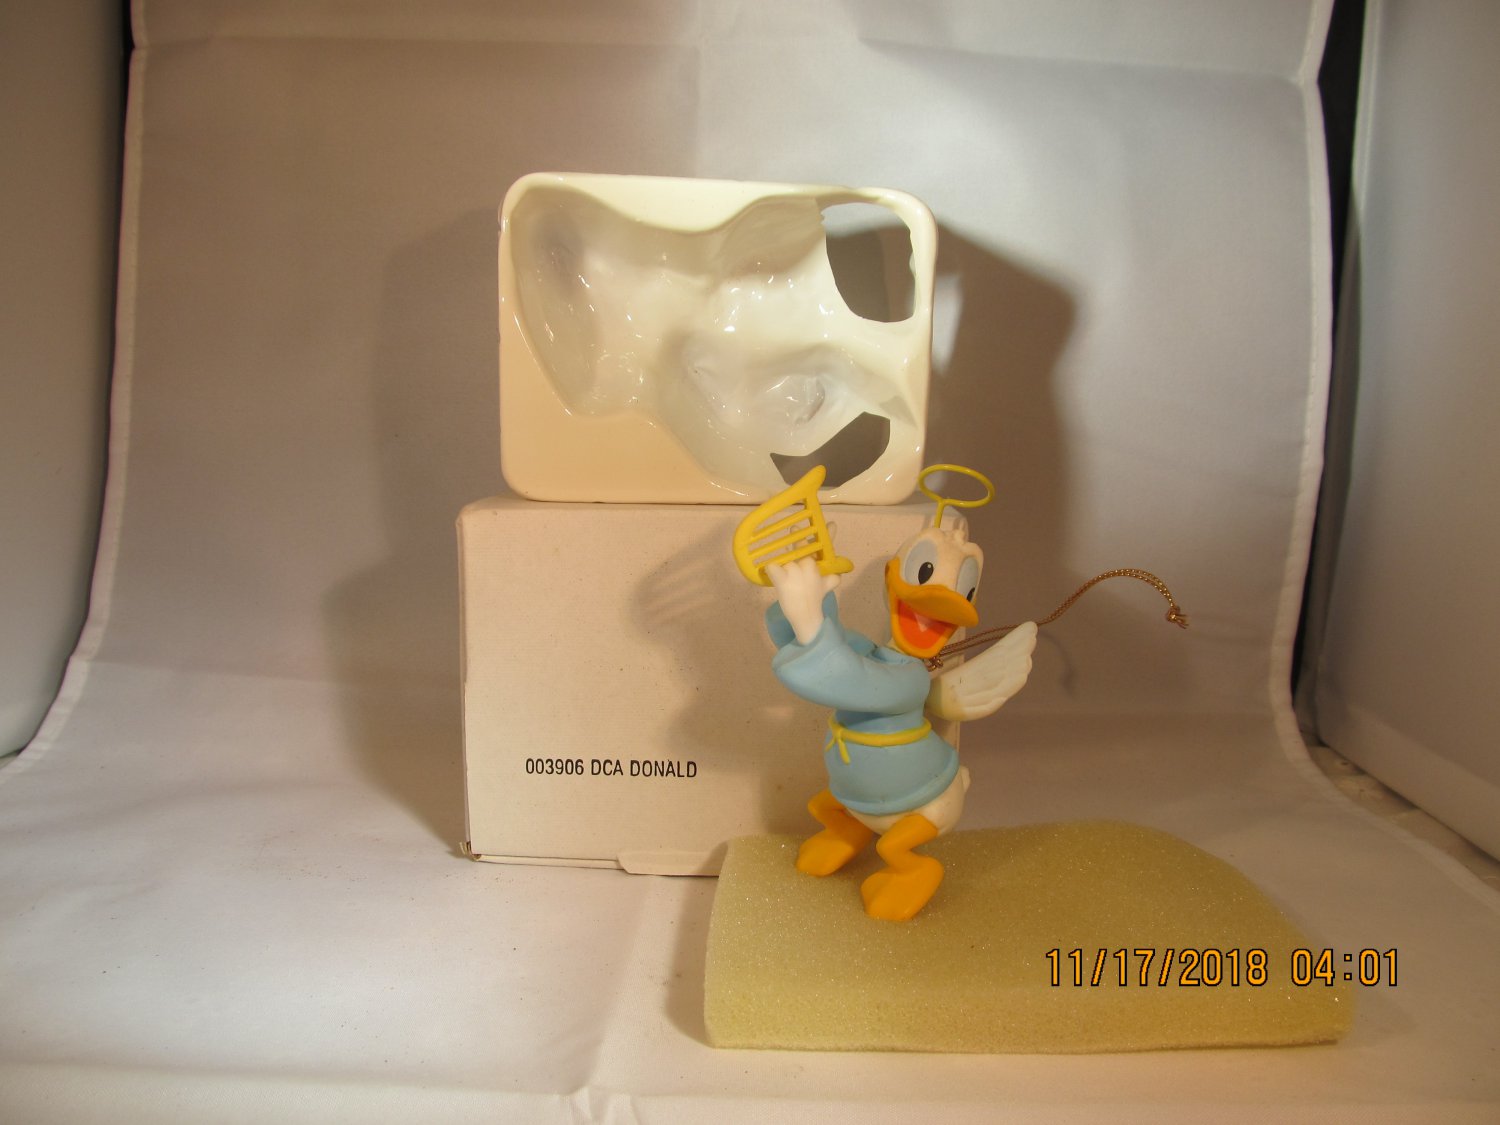 Disney Christmas Magic Ornament Donald Duck by Grolier in Box